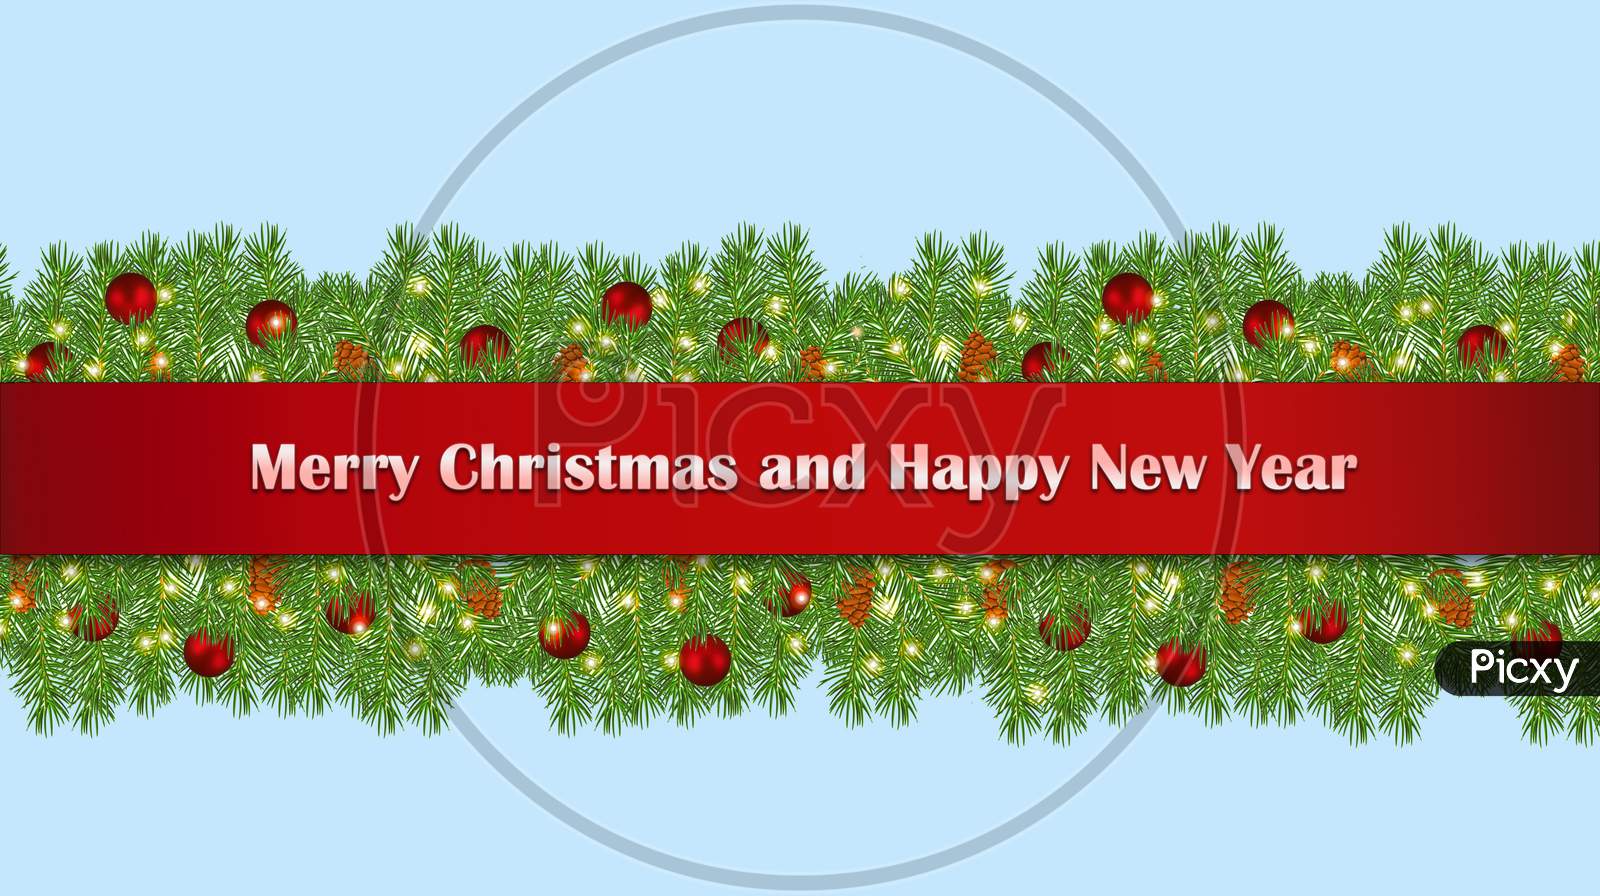 Merry Christmas and Happy New Year wishing card with fir branches, balls and decorating lights.